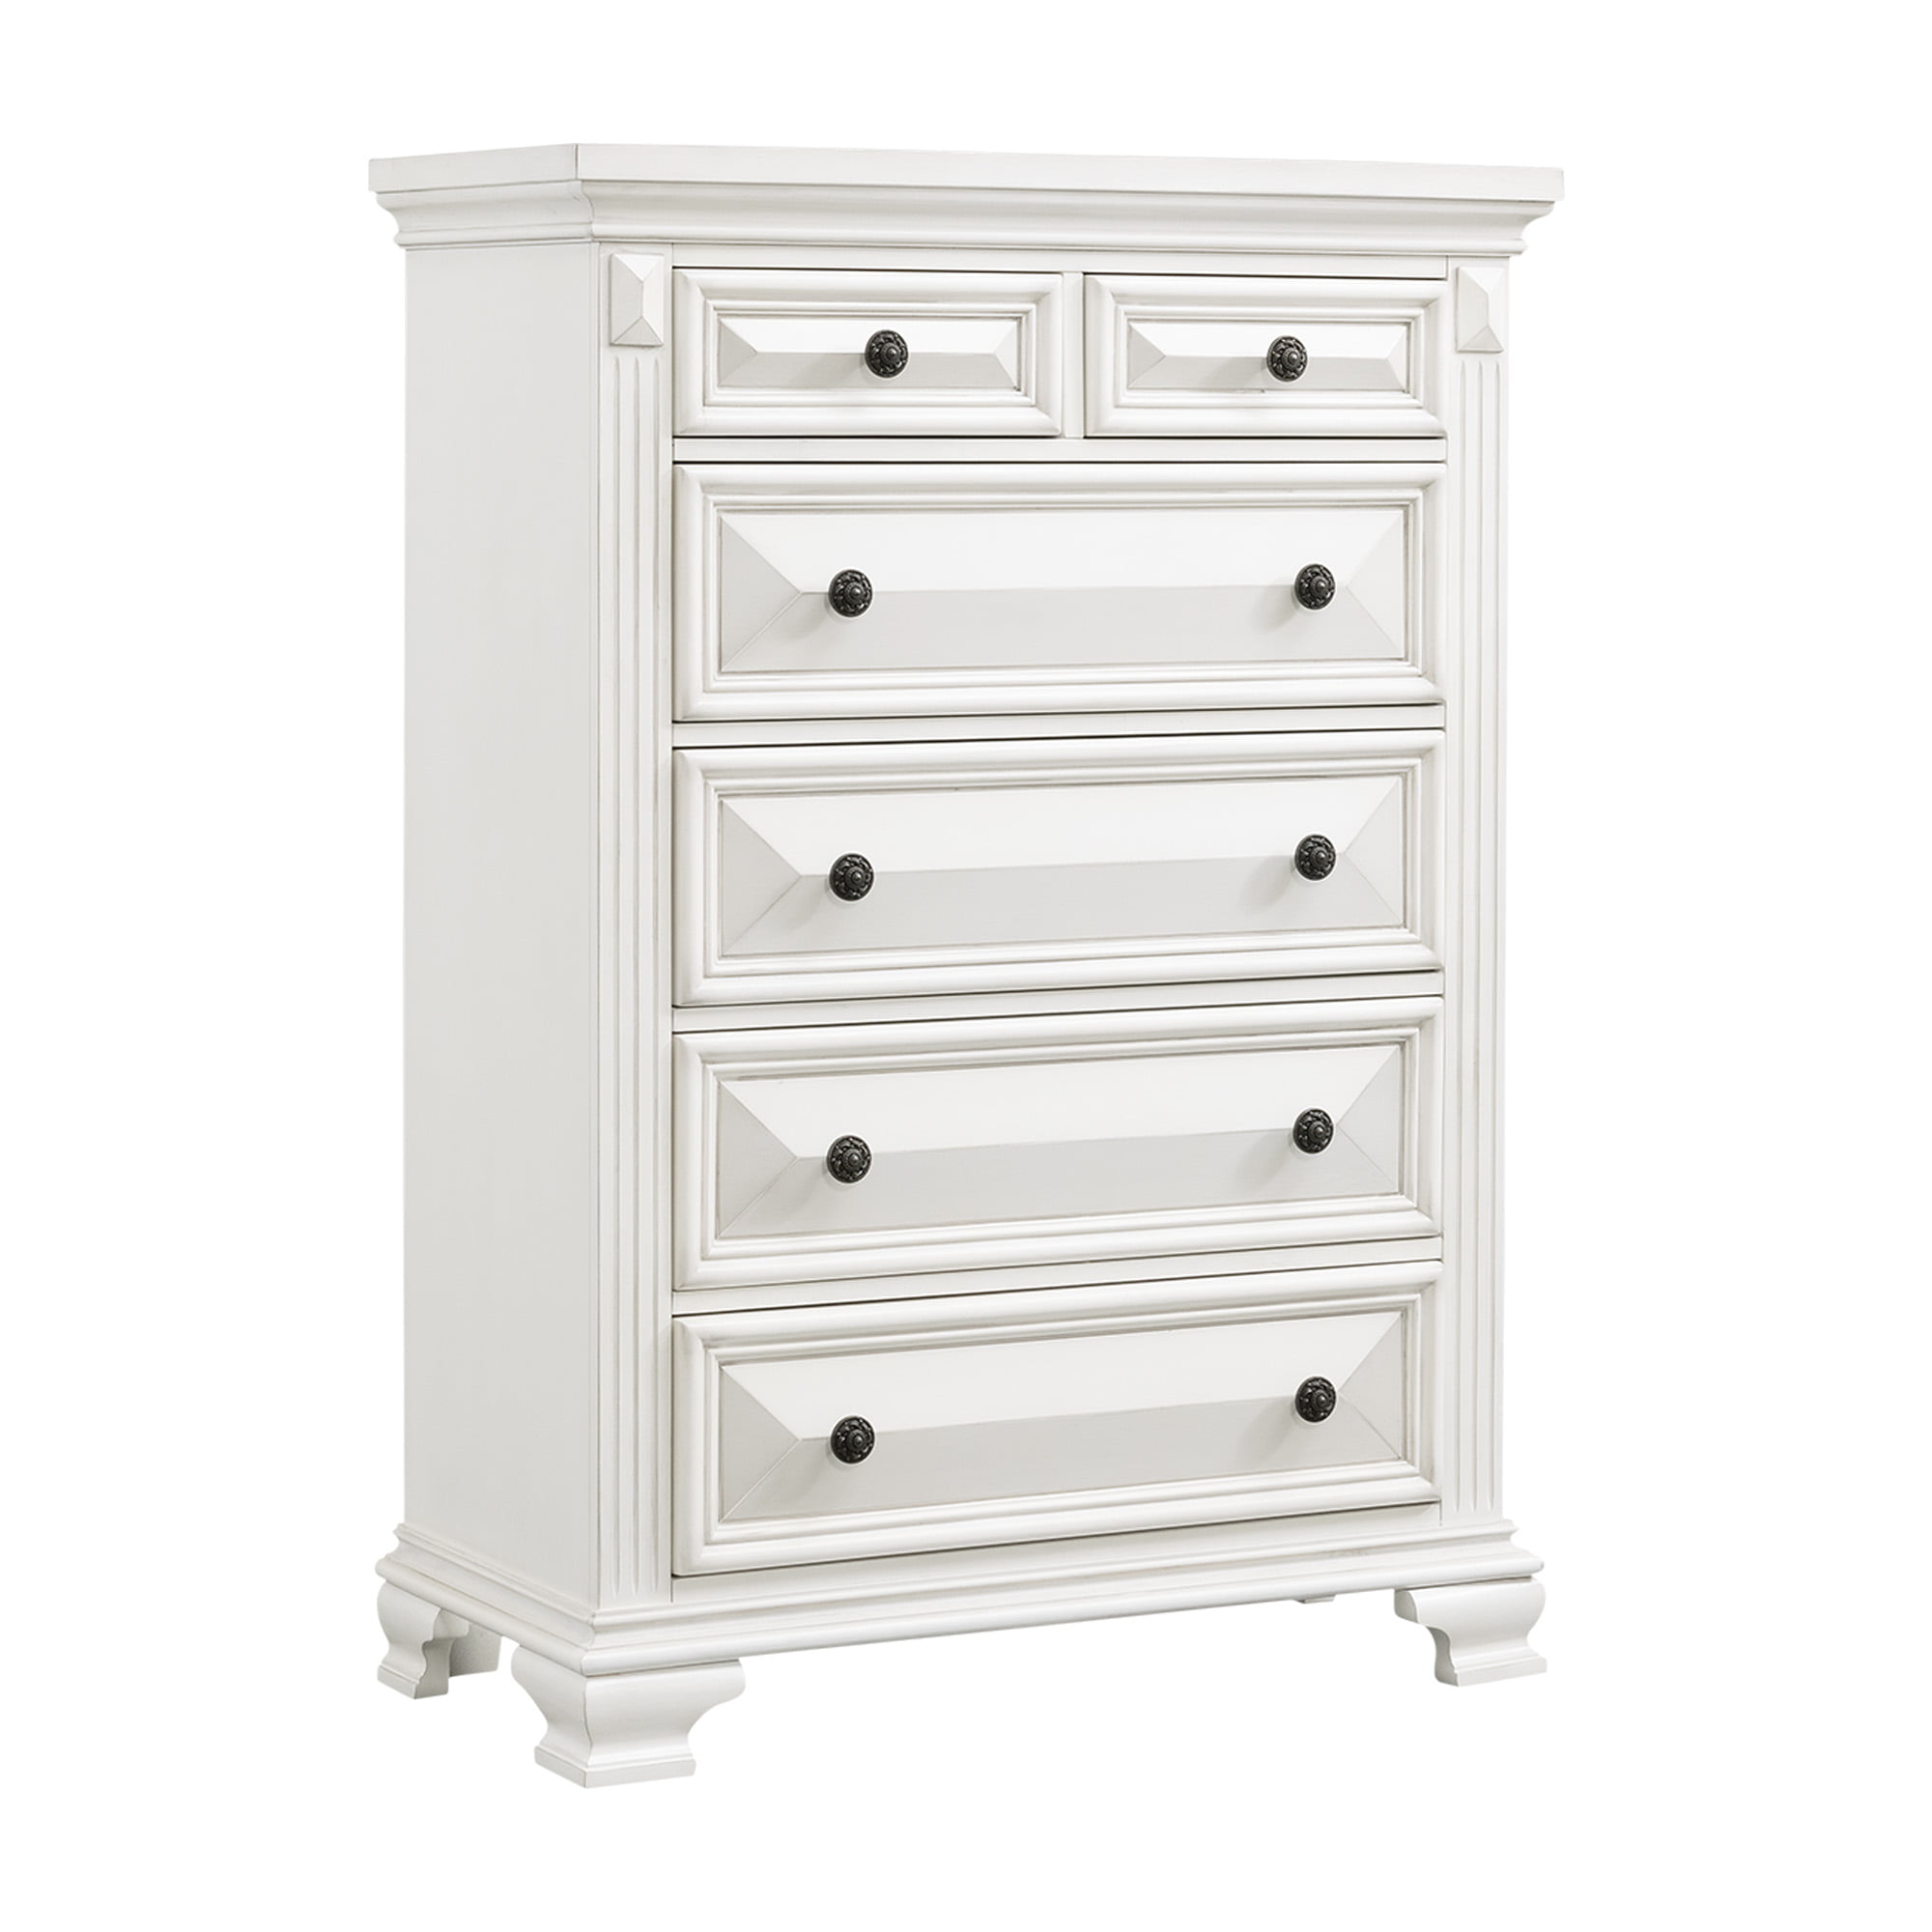 Picket House Furnishings Trent 6 Drawer Chest In White Walmart